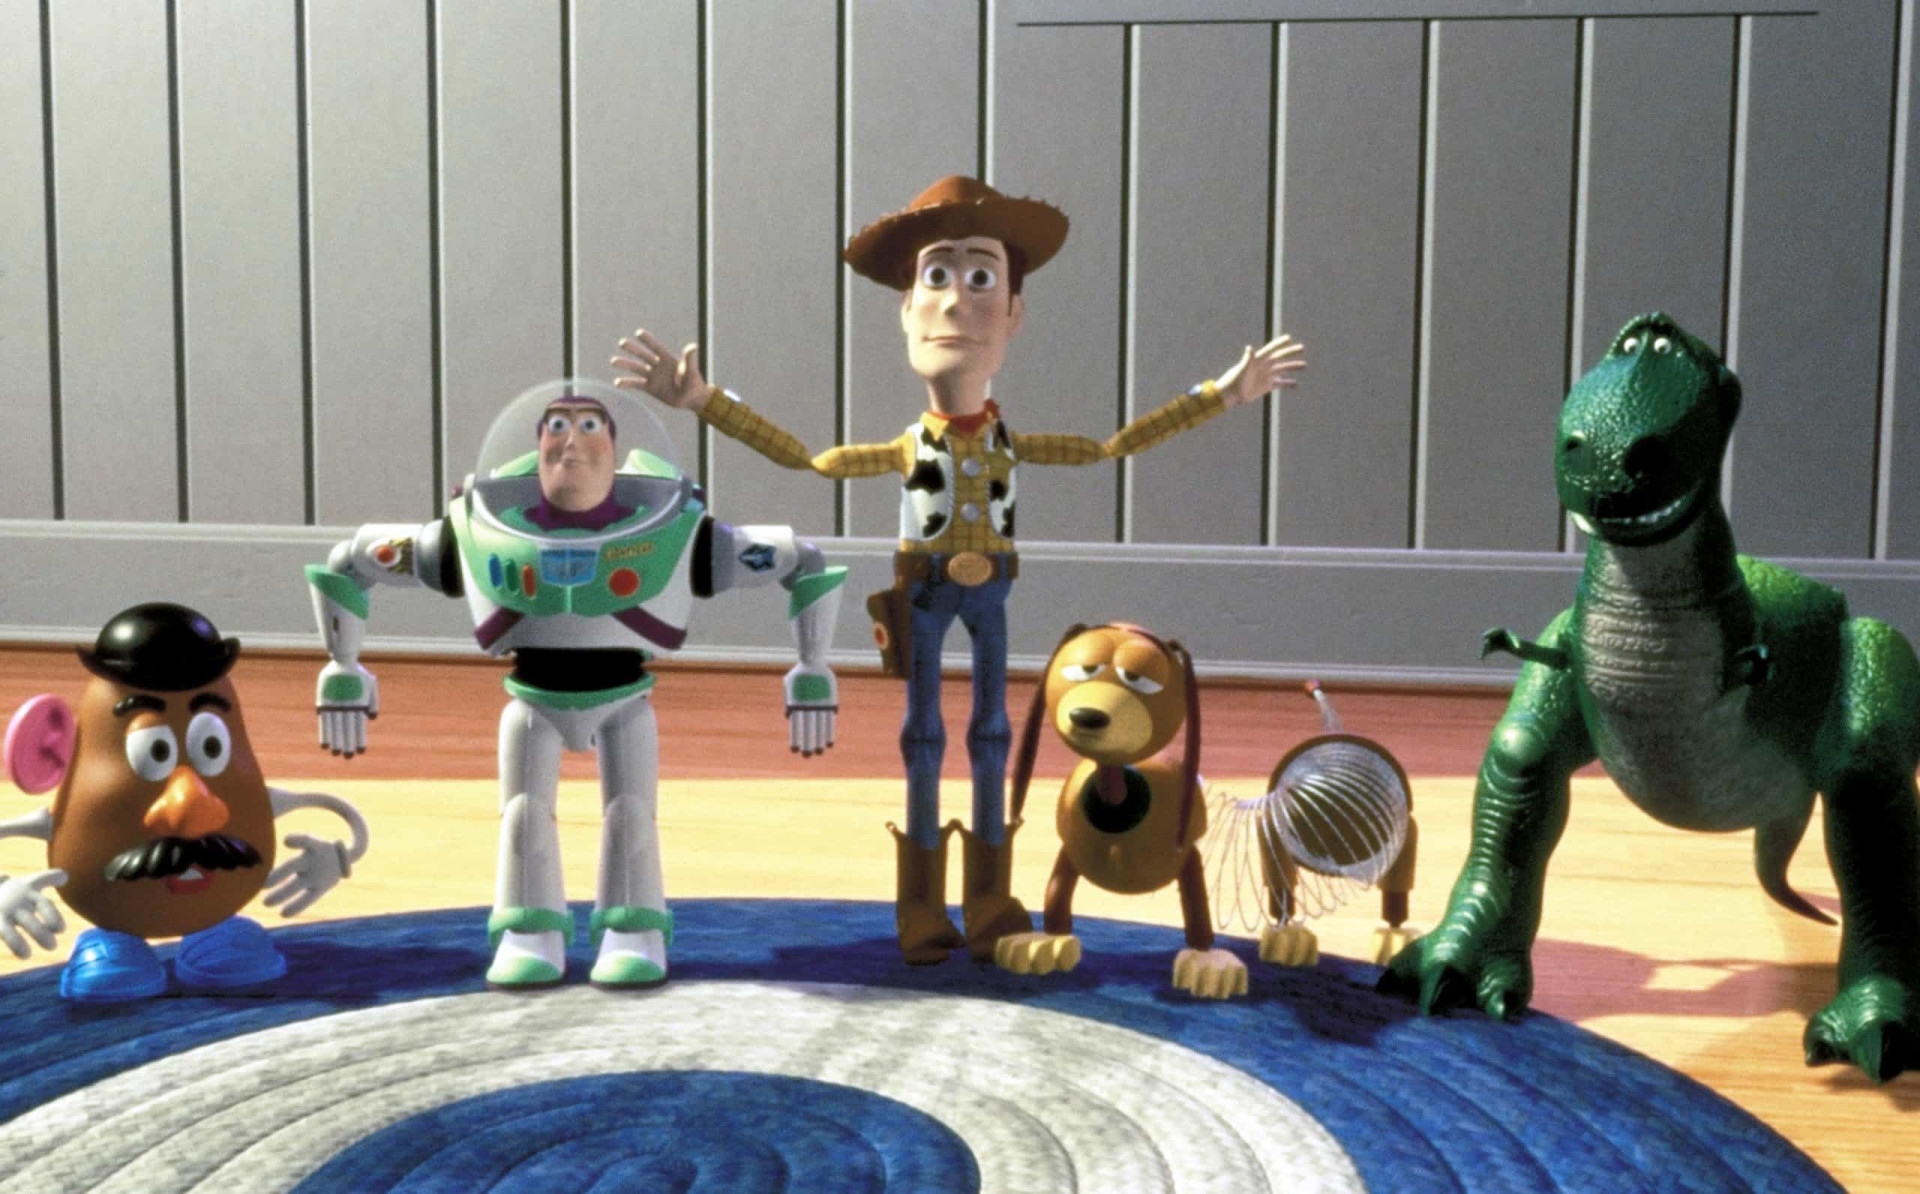 <p>This tune from 'Toy Story' (1995) is a classic about the beauty of friendship. Plus, the whole concept of toys coming to life is just really appealing to kids!</p><p><a href="https://www.msn.com/en-us/community/channel/vid-7xx8mnucu55yw63we9va2gwr7uihbxwc68fxqp25x6tg4ftibpra?cvid=94631541bc0f4f89bfd59158d696ad7e">Follow us and access great exclusive content every day</a></p>